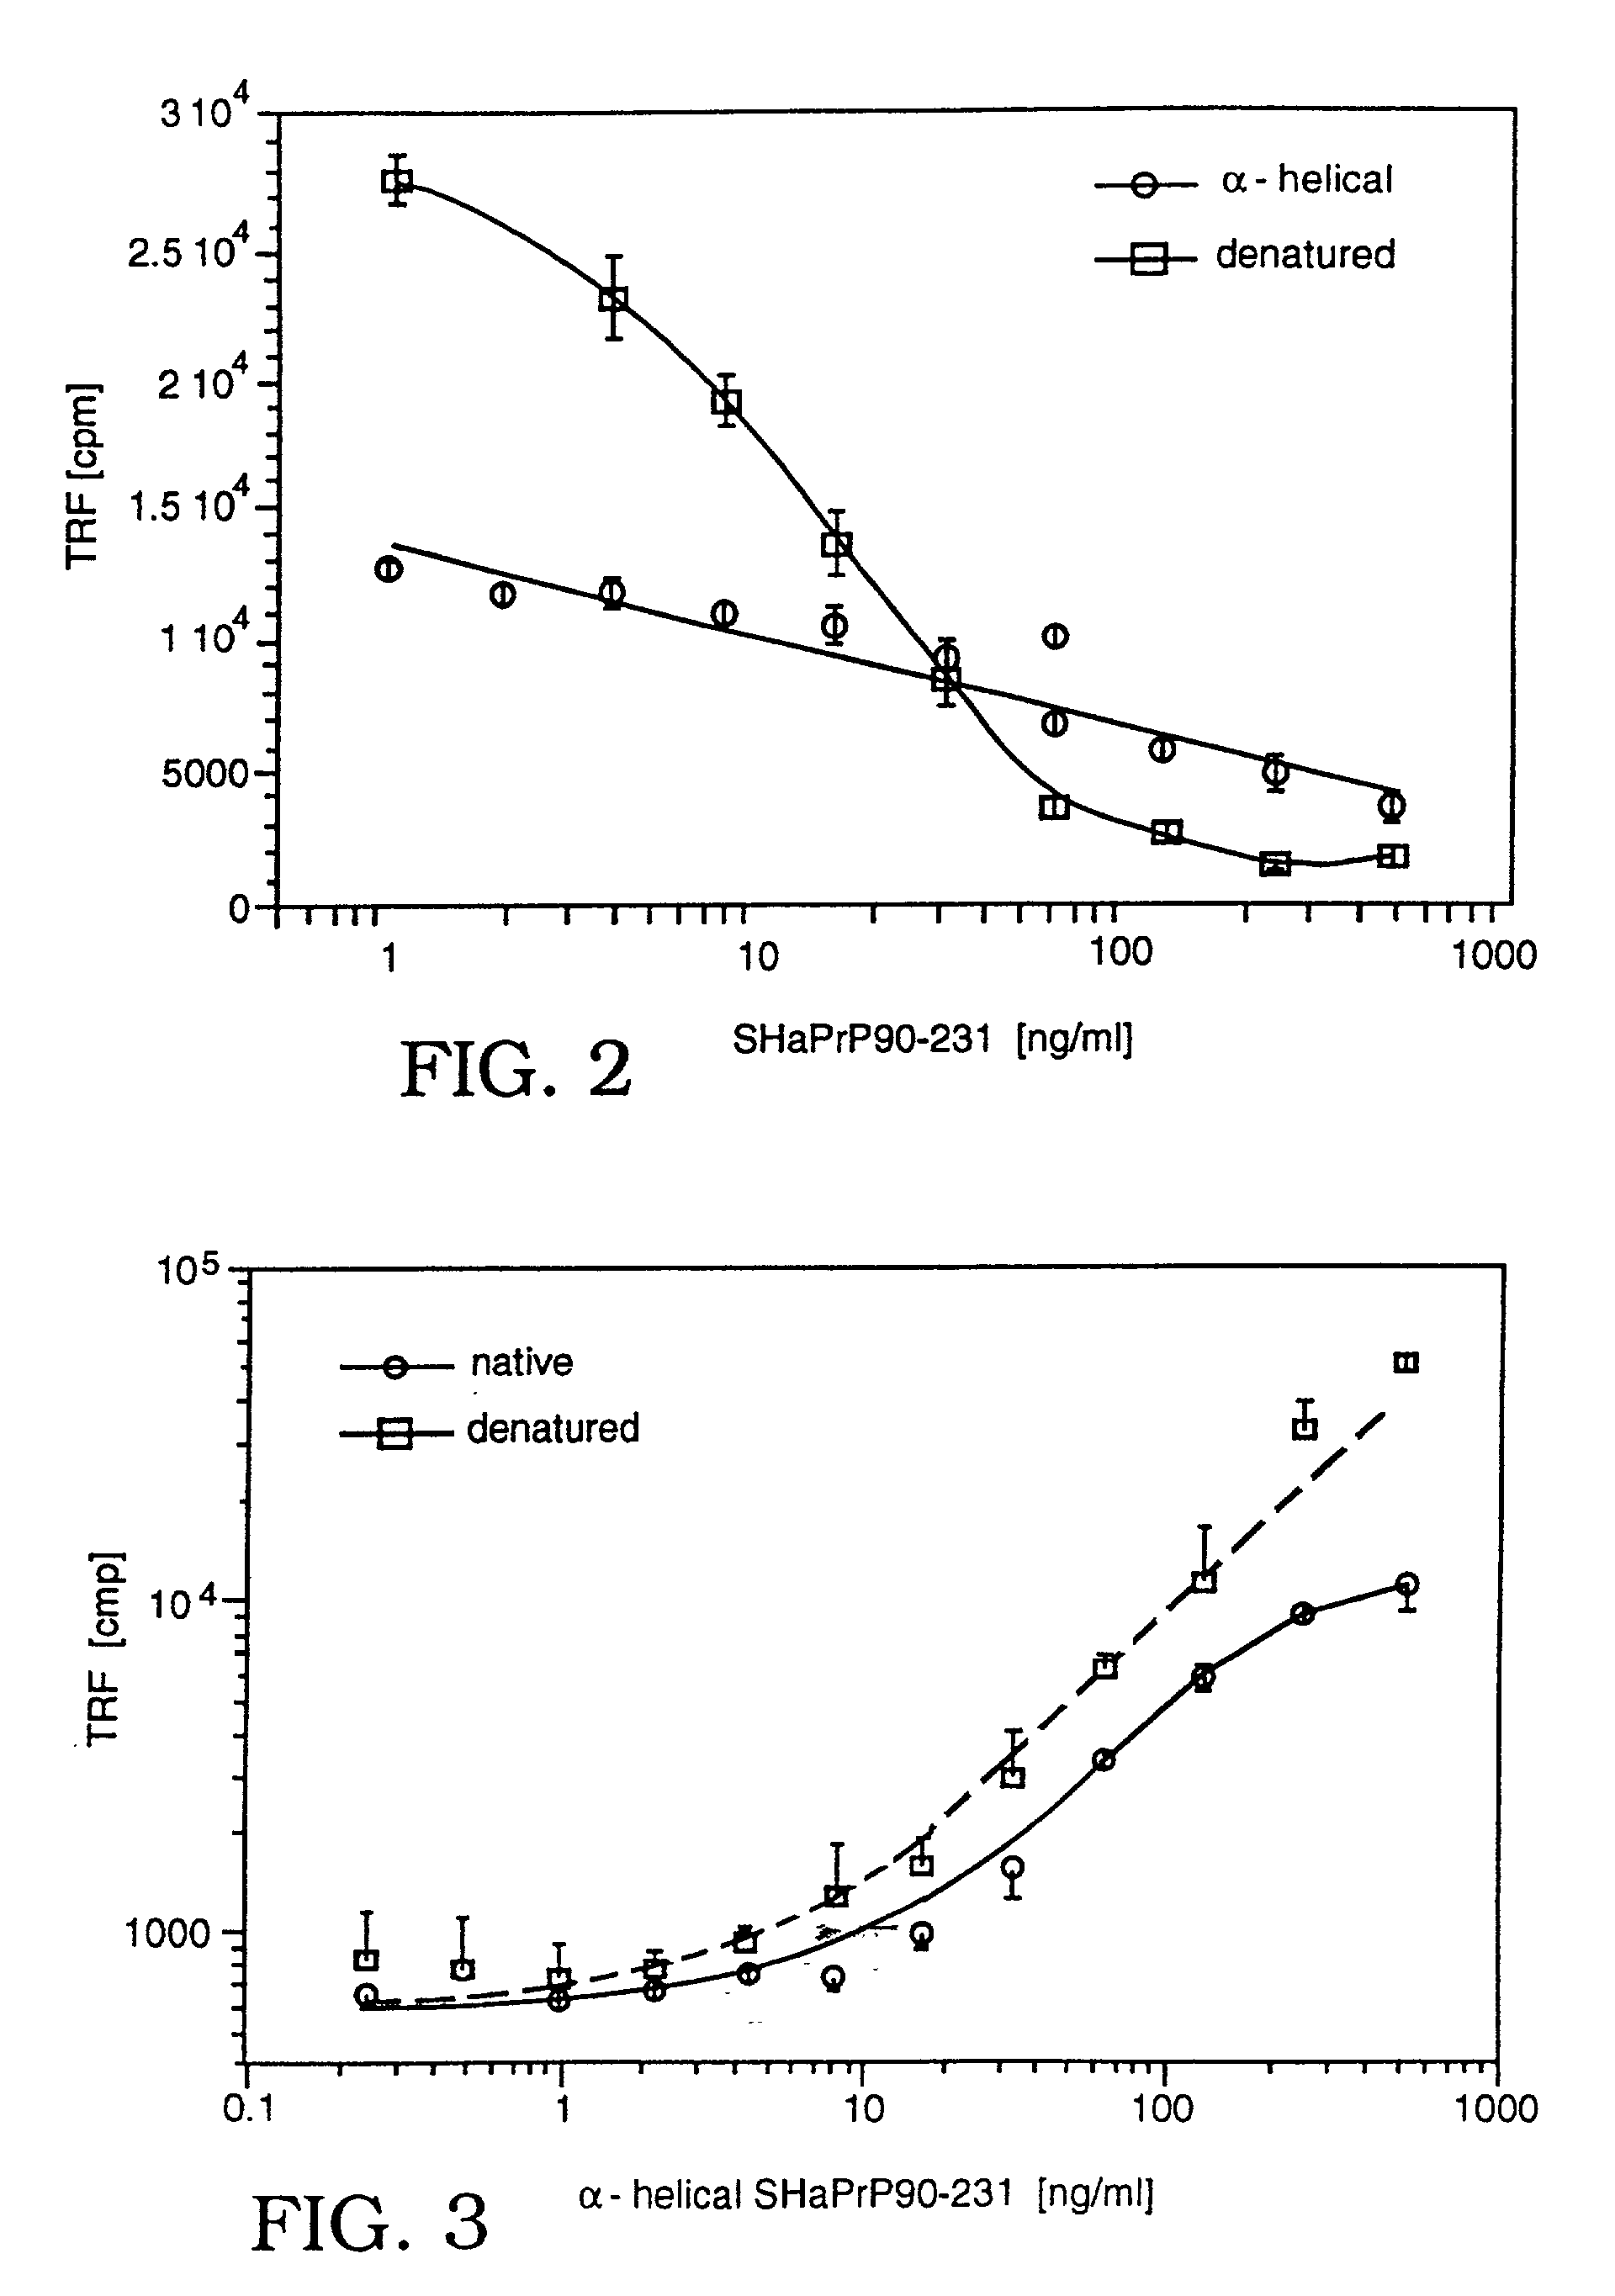 Assay for disease related conformation of a protein